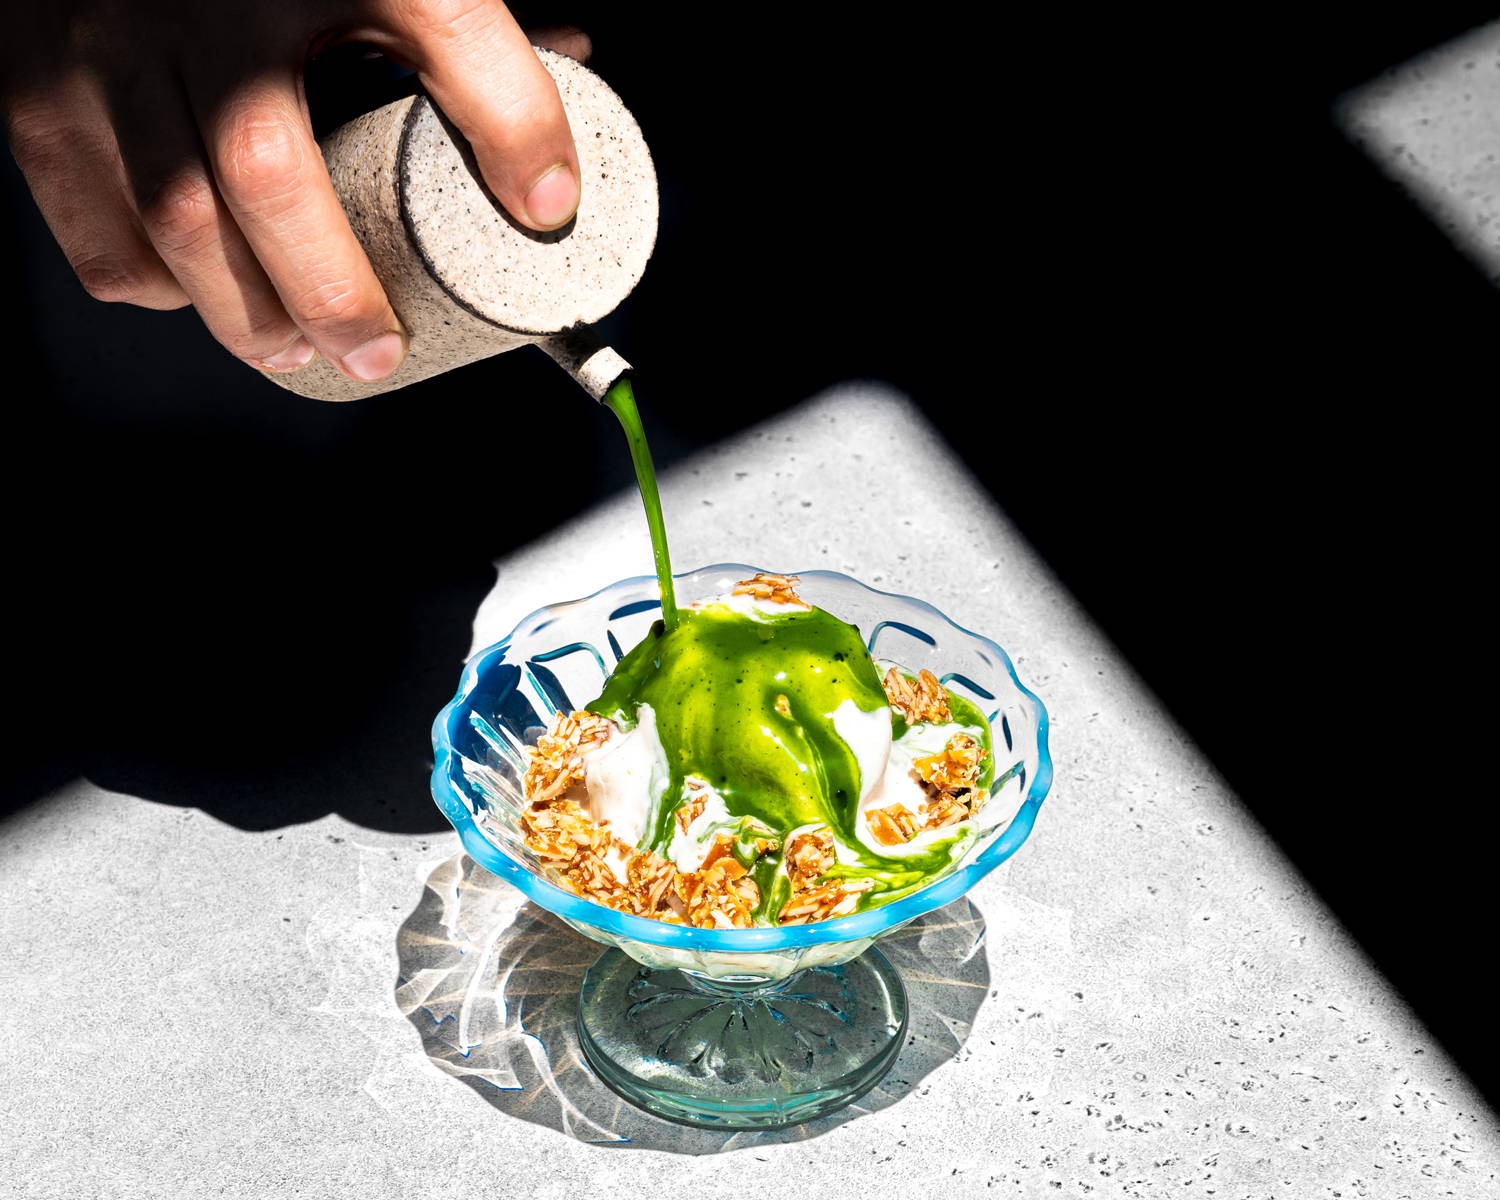 A bright green shot of matcha is drizzled over a scoop of vanilla ice cream with almond praline crumbles.